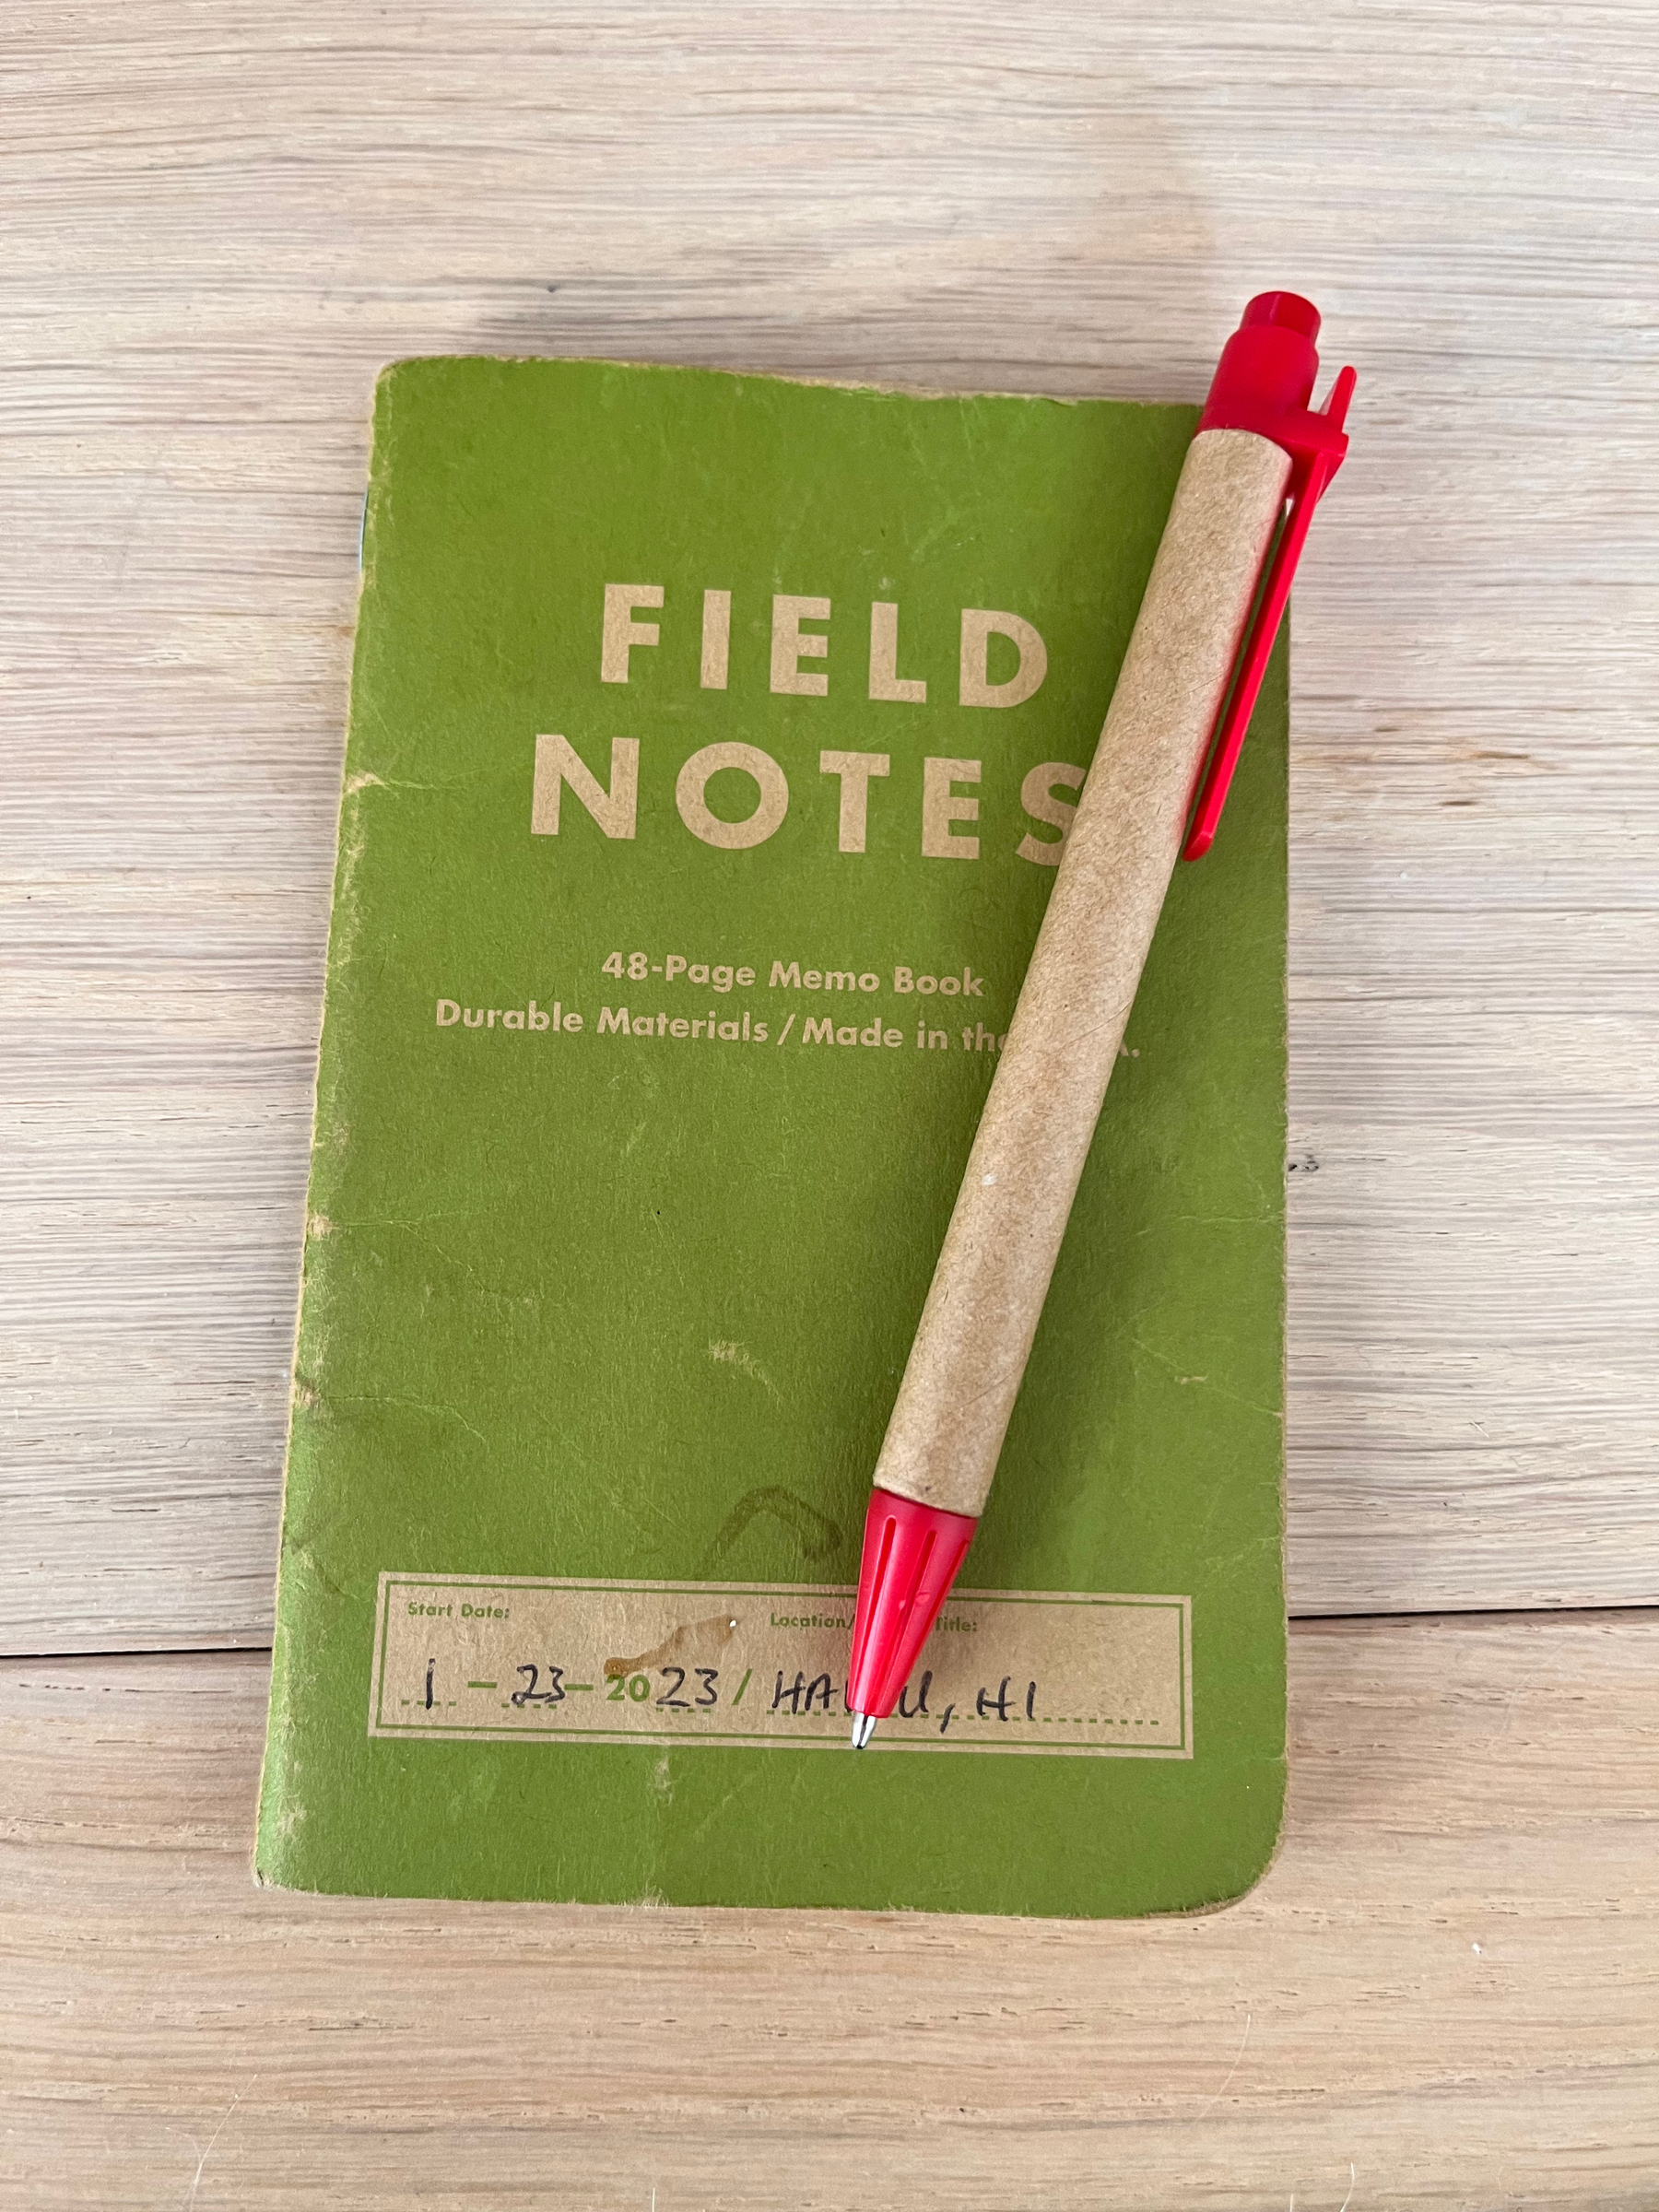 My current note book from Fieldnotes with a pen from Virgin Atlantic